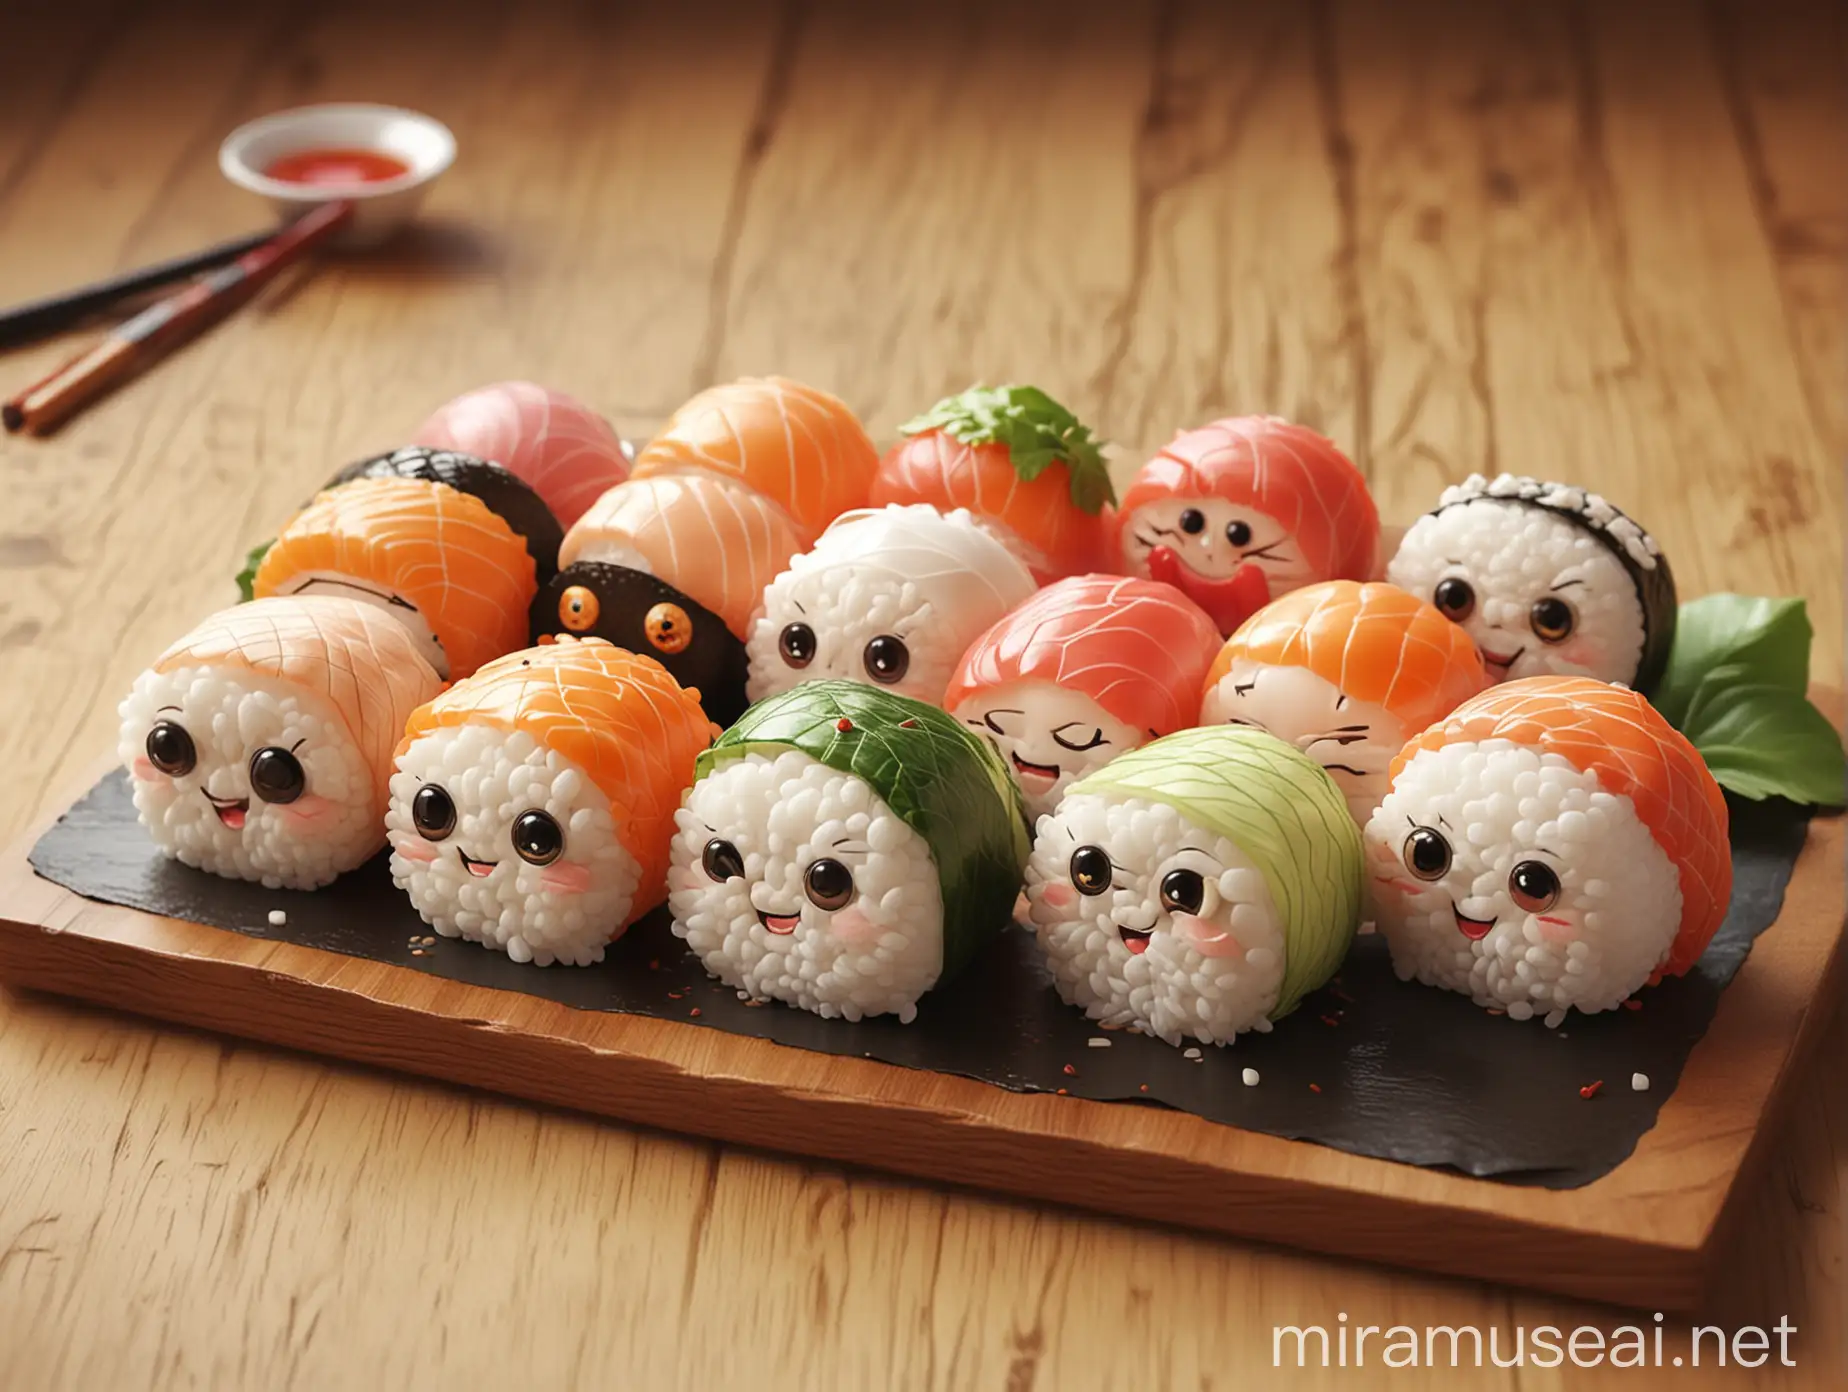 Adorable 3D Render of Cute Sushi Rolls with Faces and Eyes on a Table